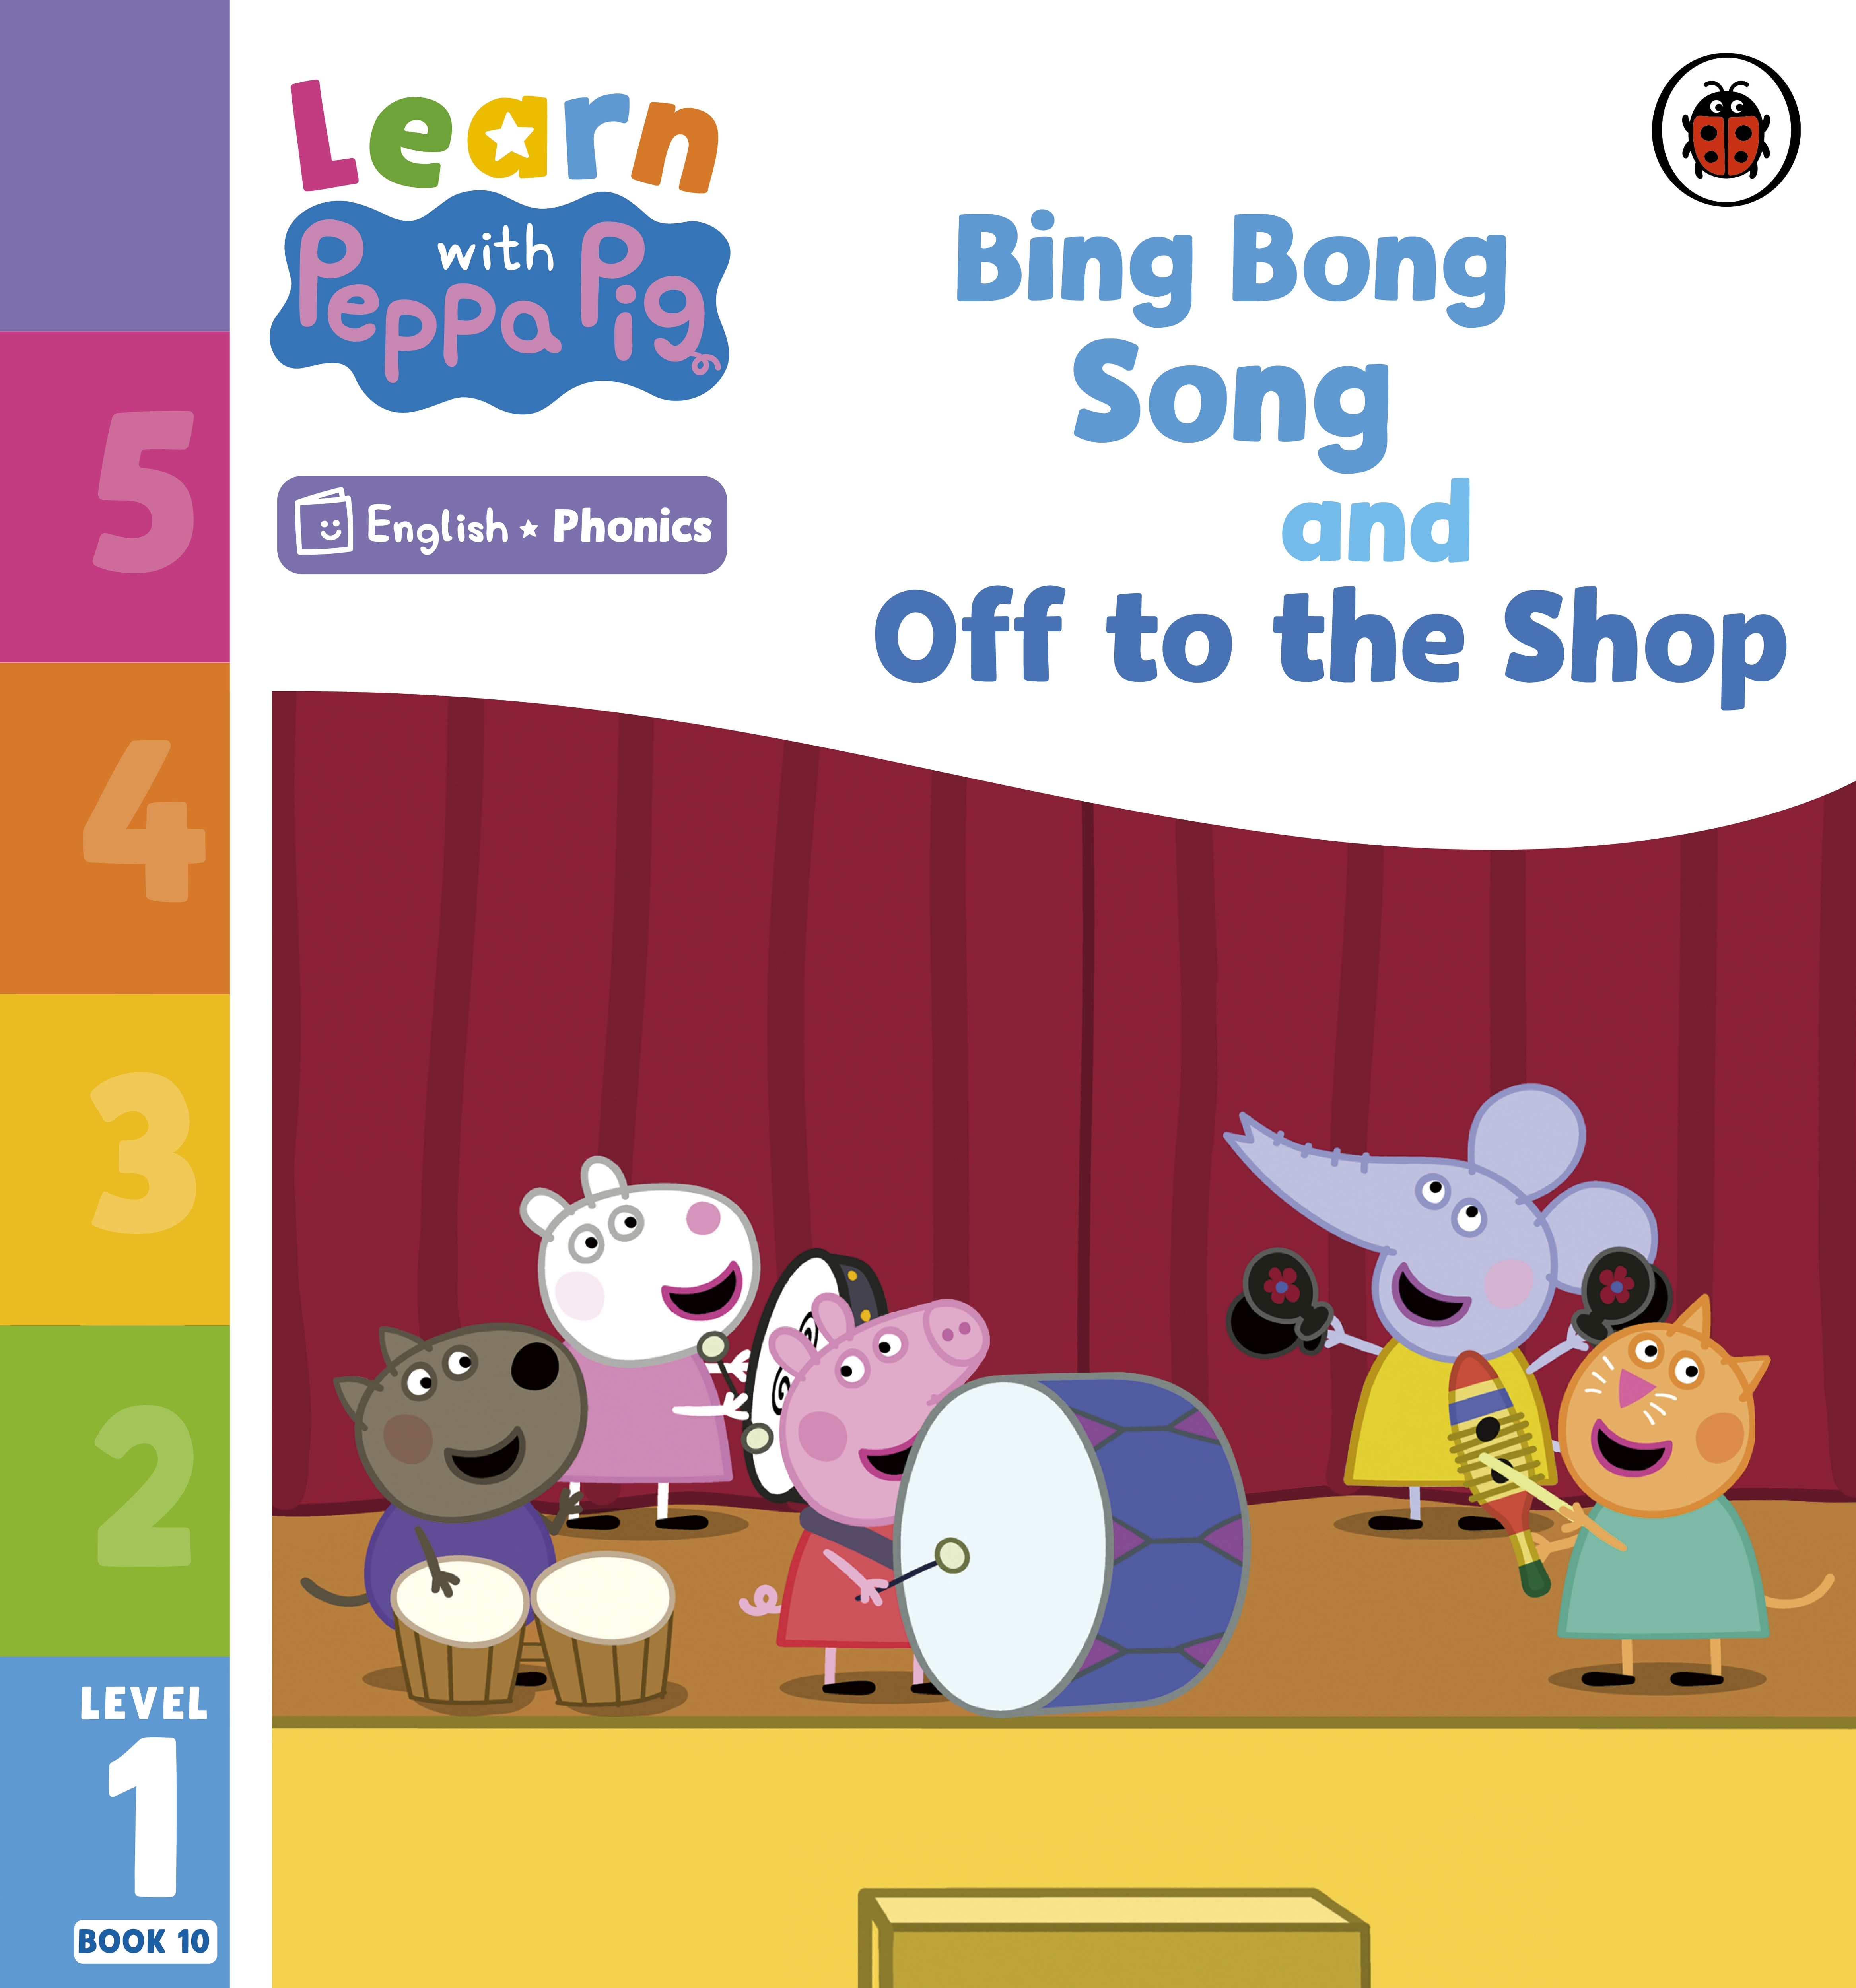 Book “Learn with Peppa Phonics Level 1 Book 10 — Bing Bong Song and Off to the Shop (Phonics Reader)” by Peppa Pig — January 5, 2023